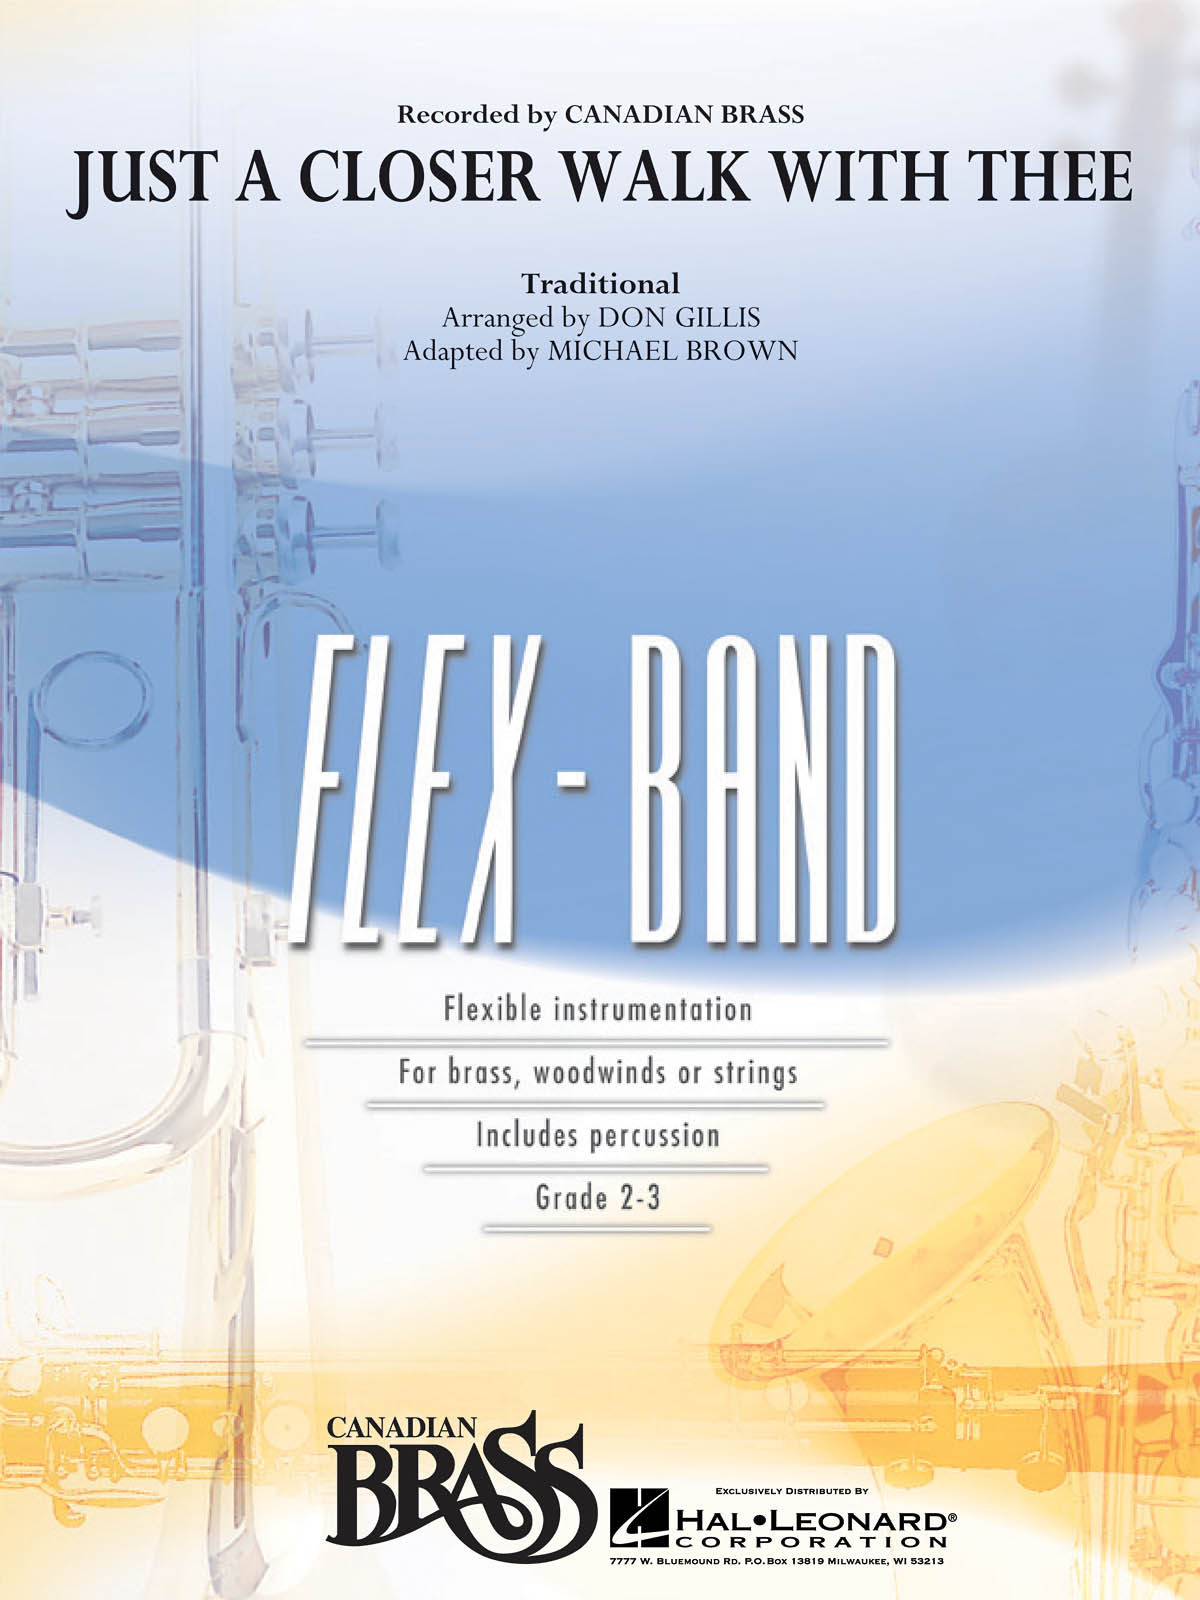 The Canadian Brass: Just a Closer Walk With Thee: Concert Band: Score